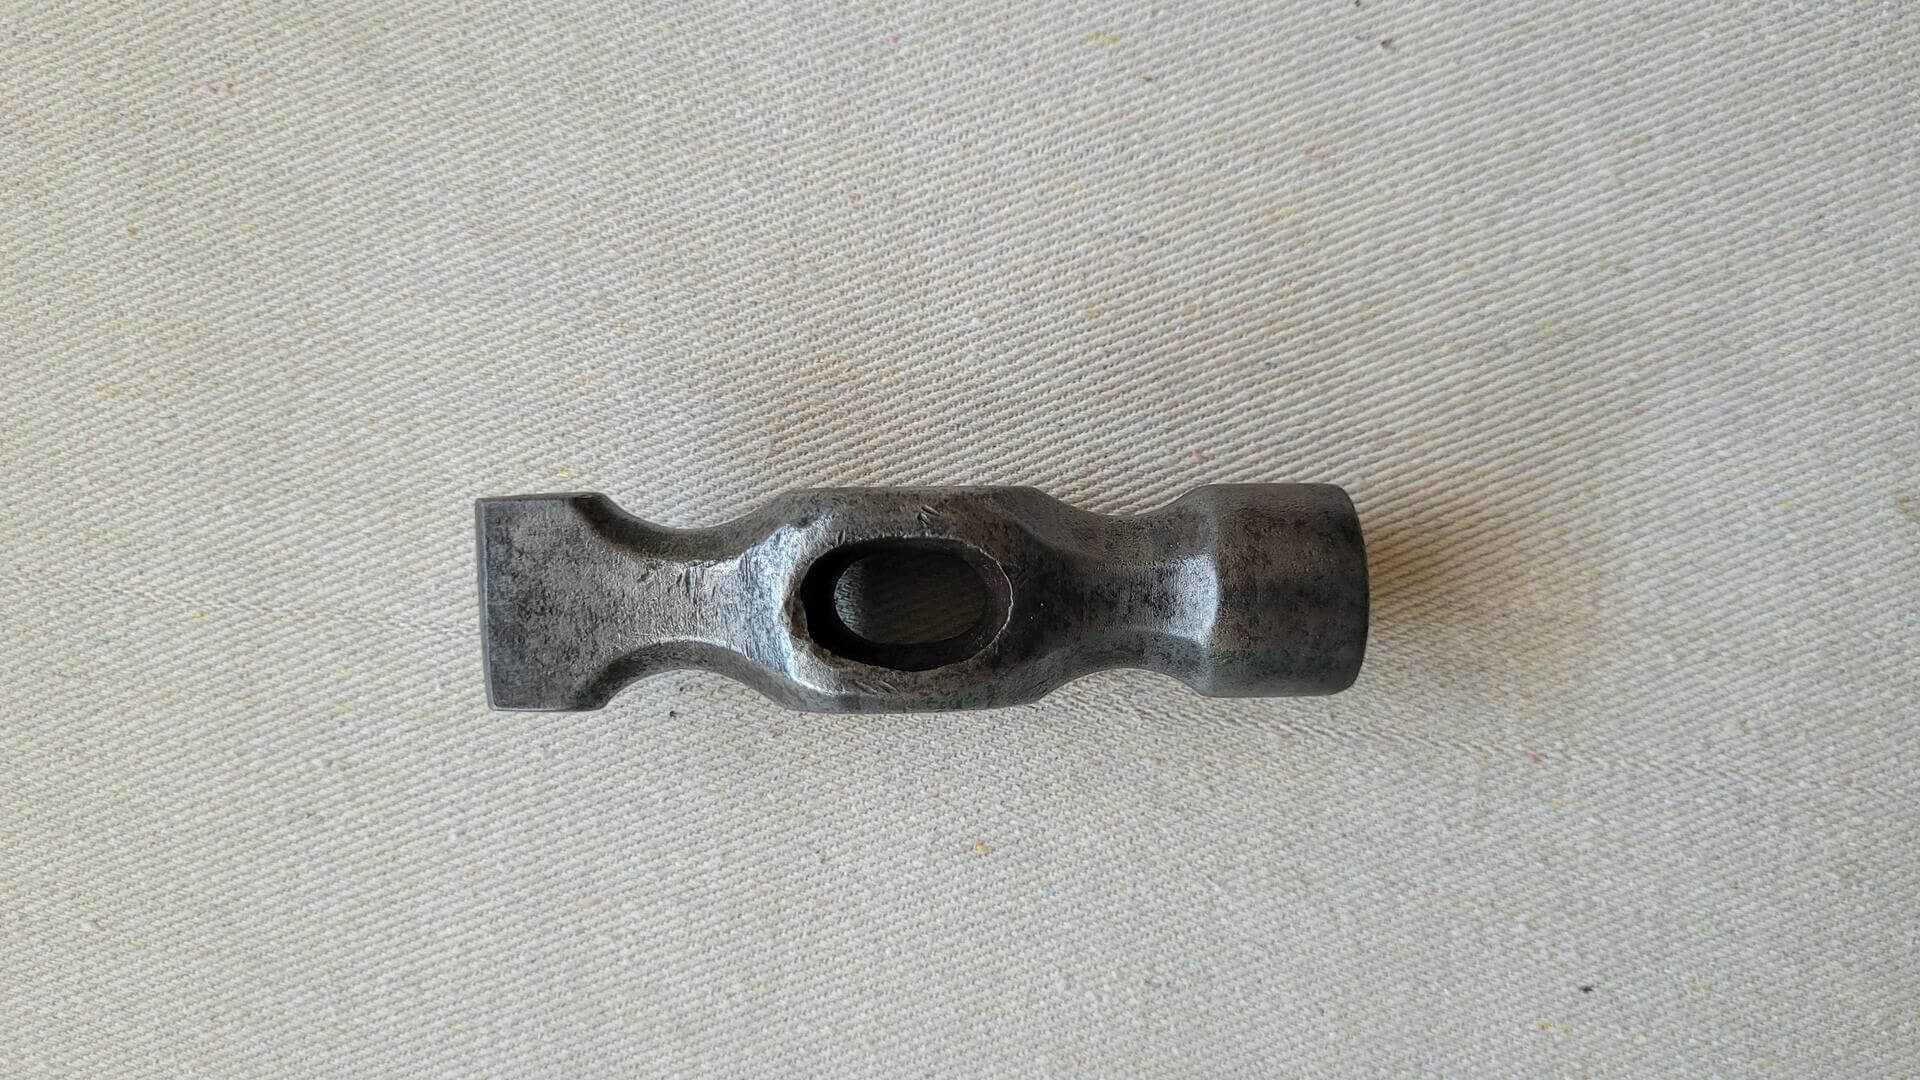 Vintage woodworking Warrington pattern cross pein joiners hammer head. Antique and collectible carpenter striking tool designed with a cast cross-peen end